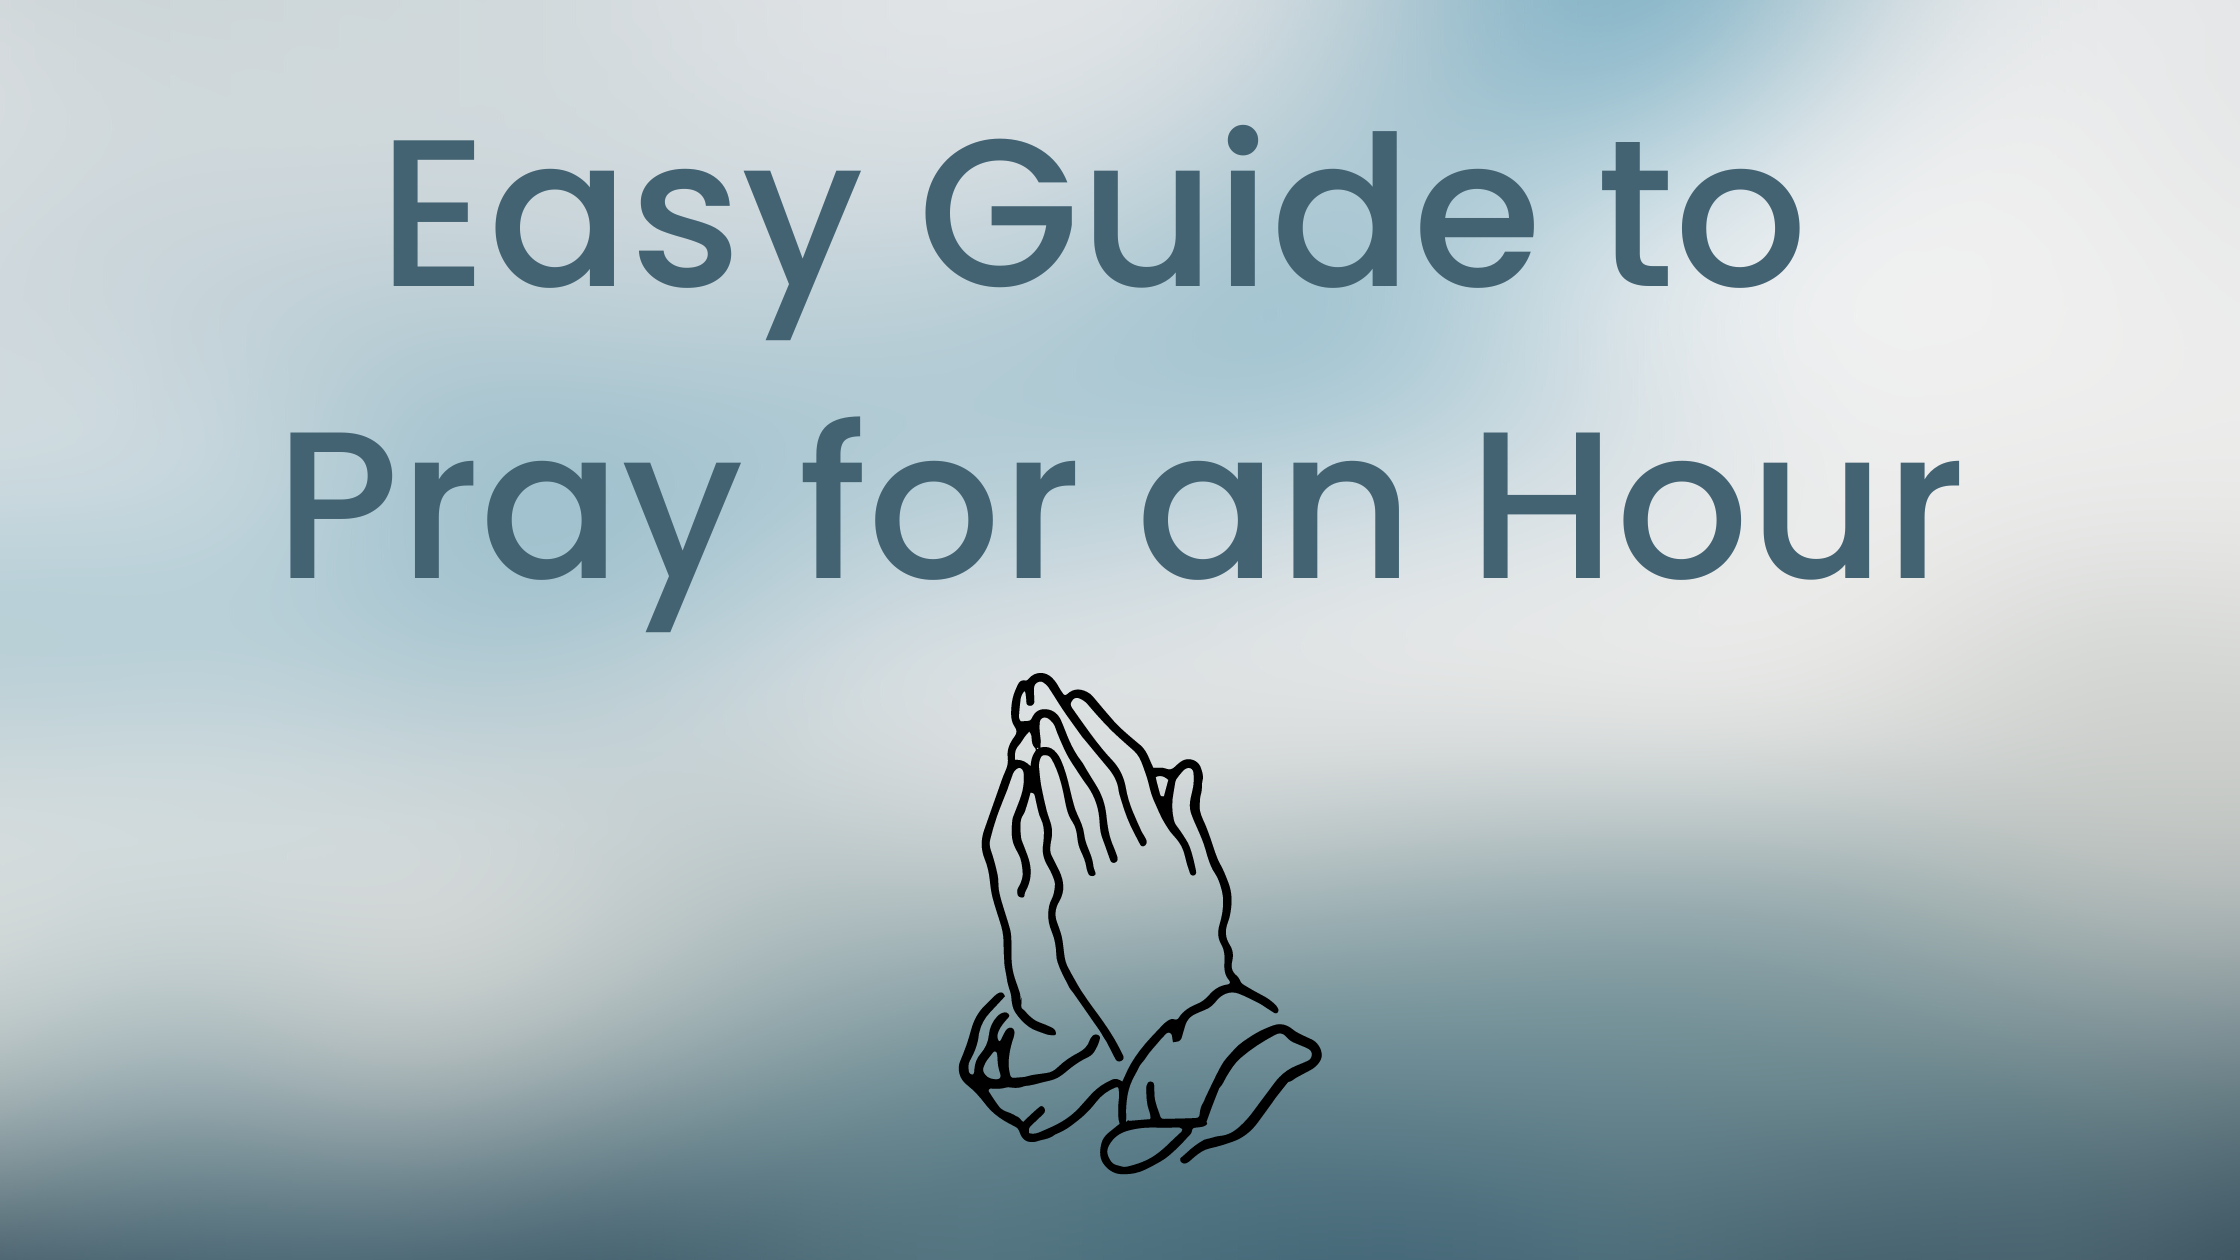 Easy Guide to Pray for an Hour